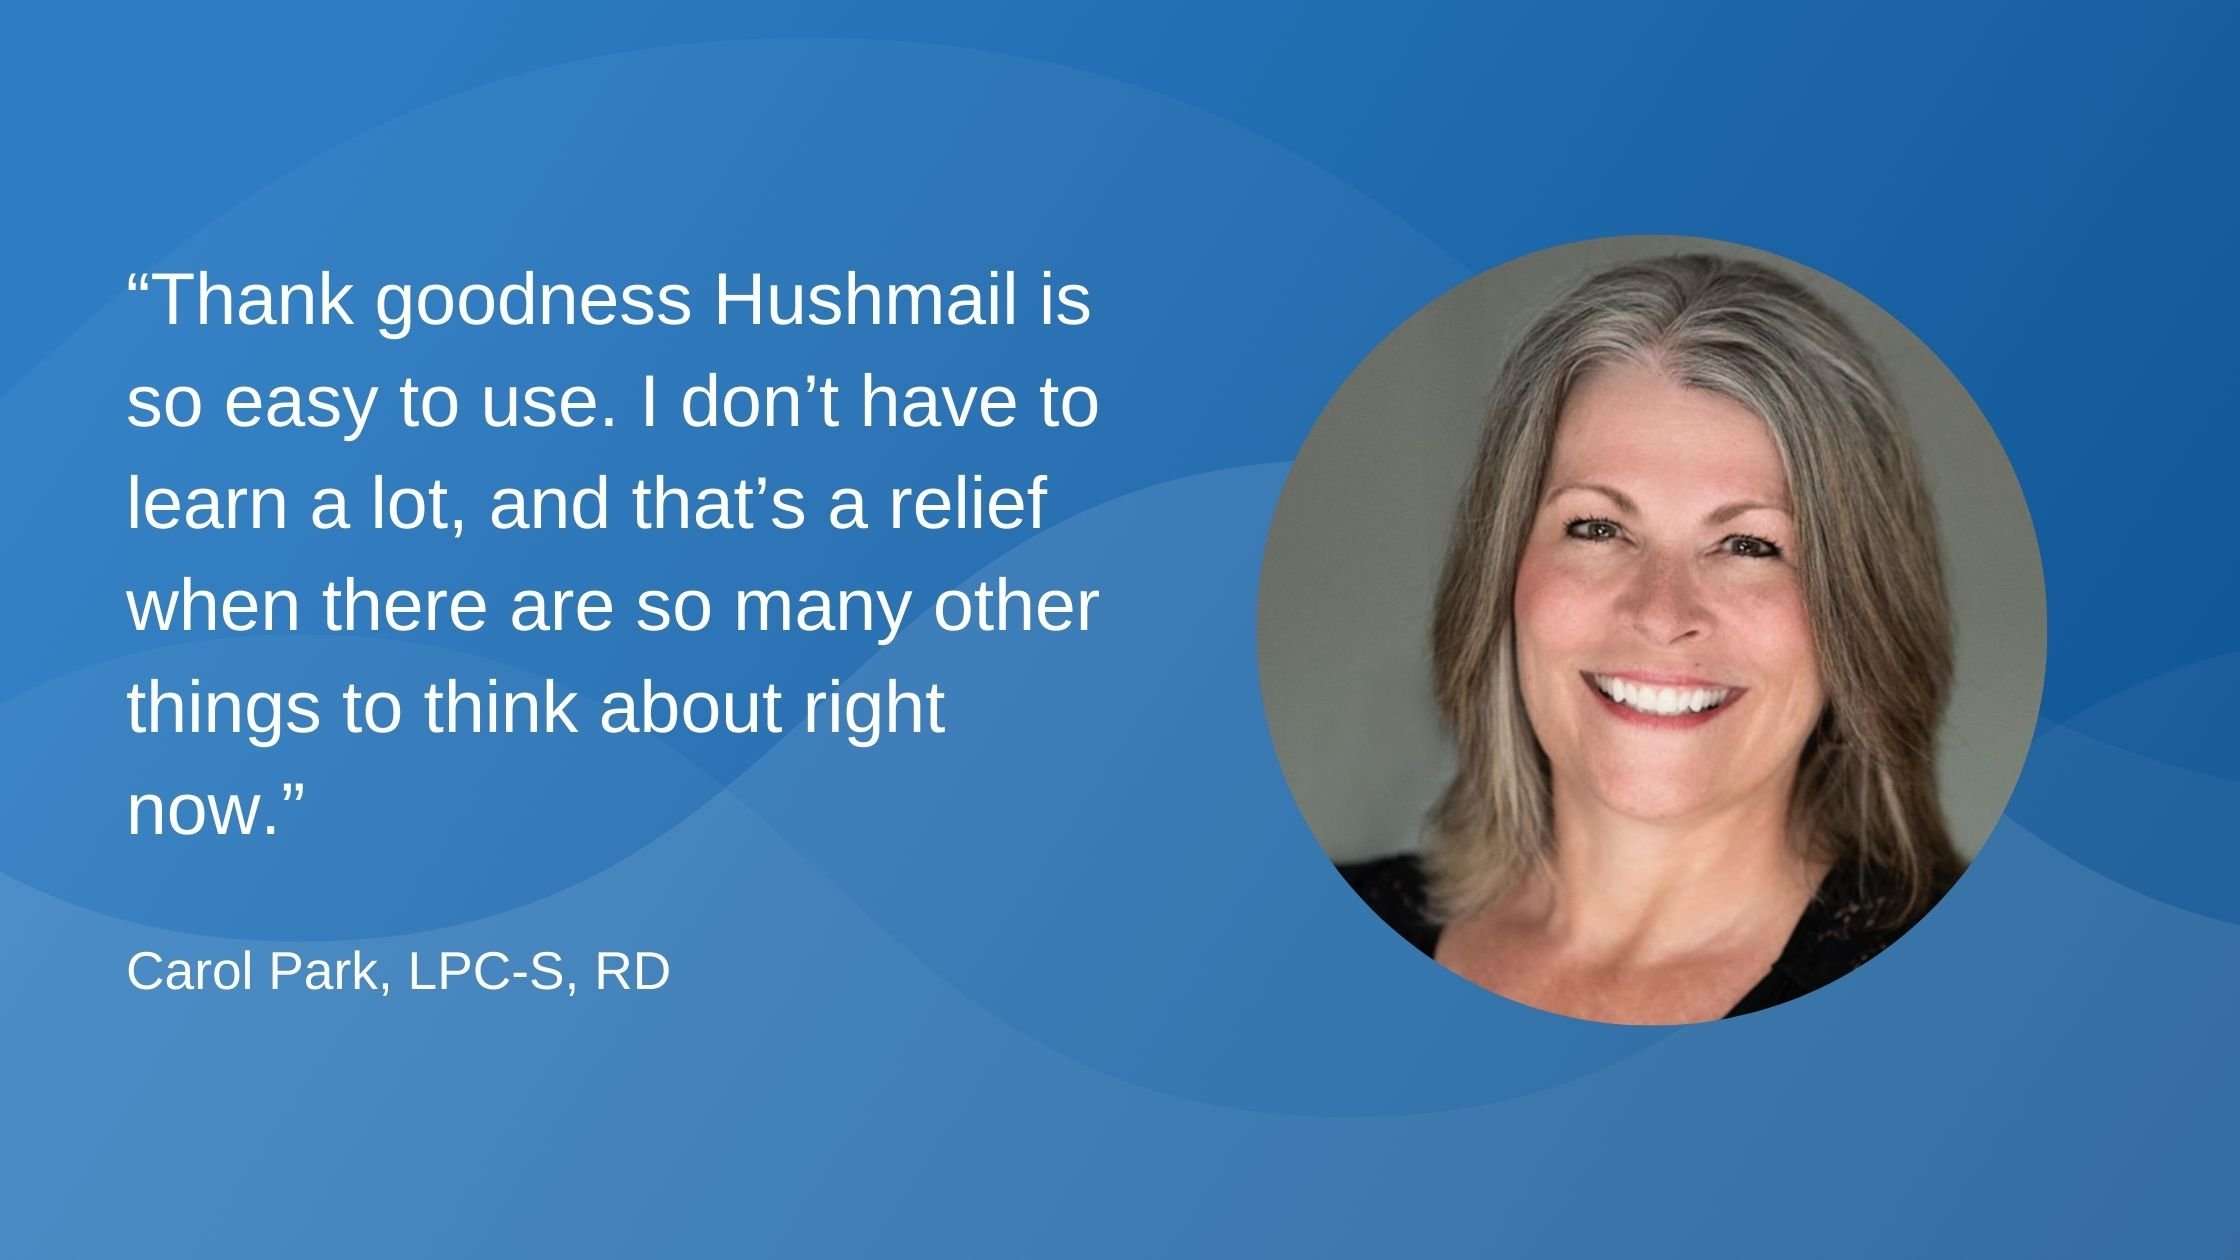 “Thank goodness Hushmail is so easy to use. I don’t have to learn a lot, and that’s a relief when there are so many other things to think about right now.”(1)